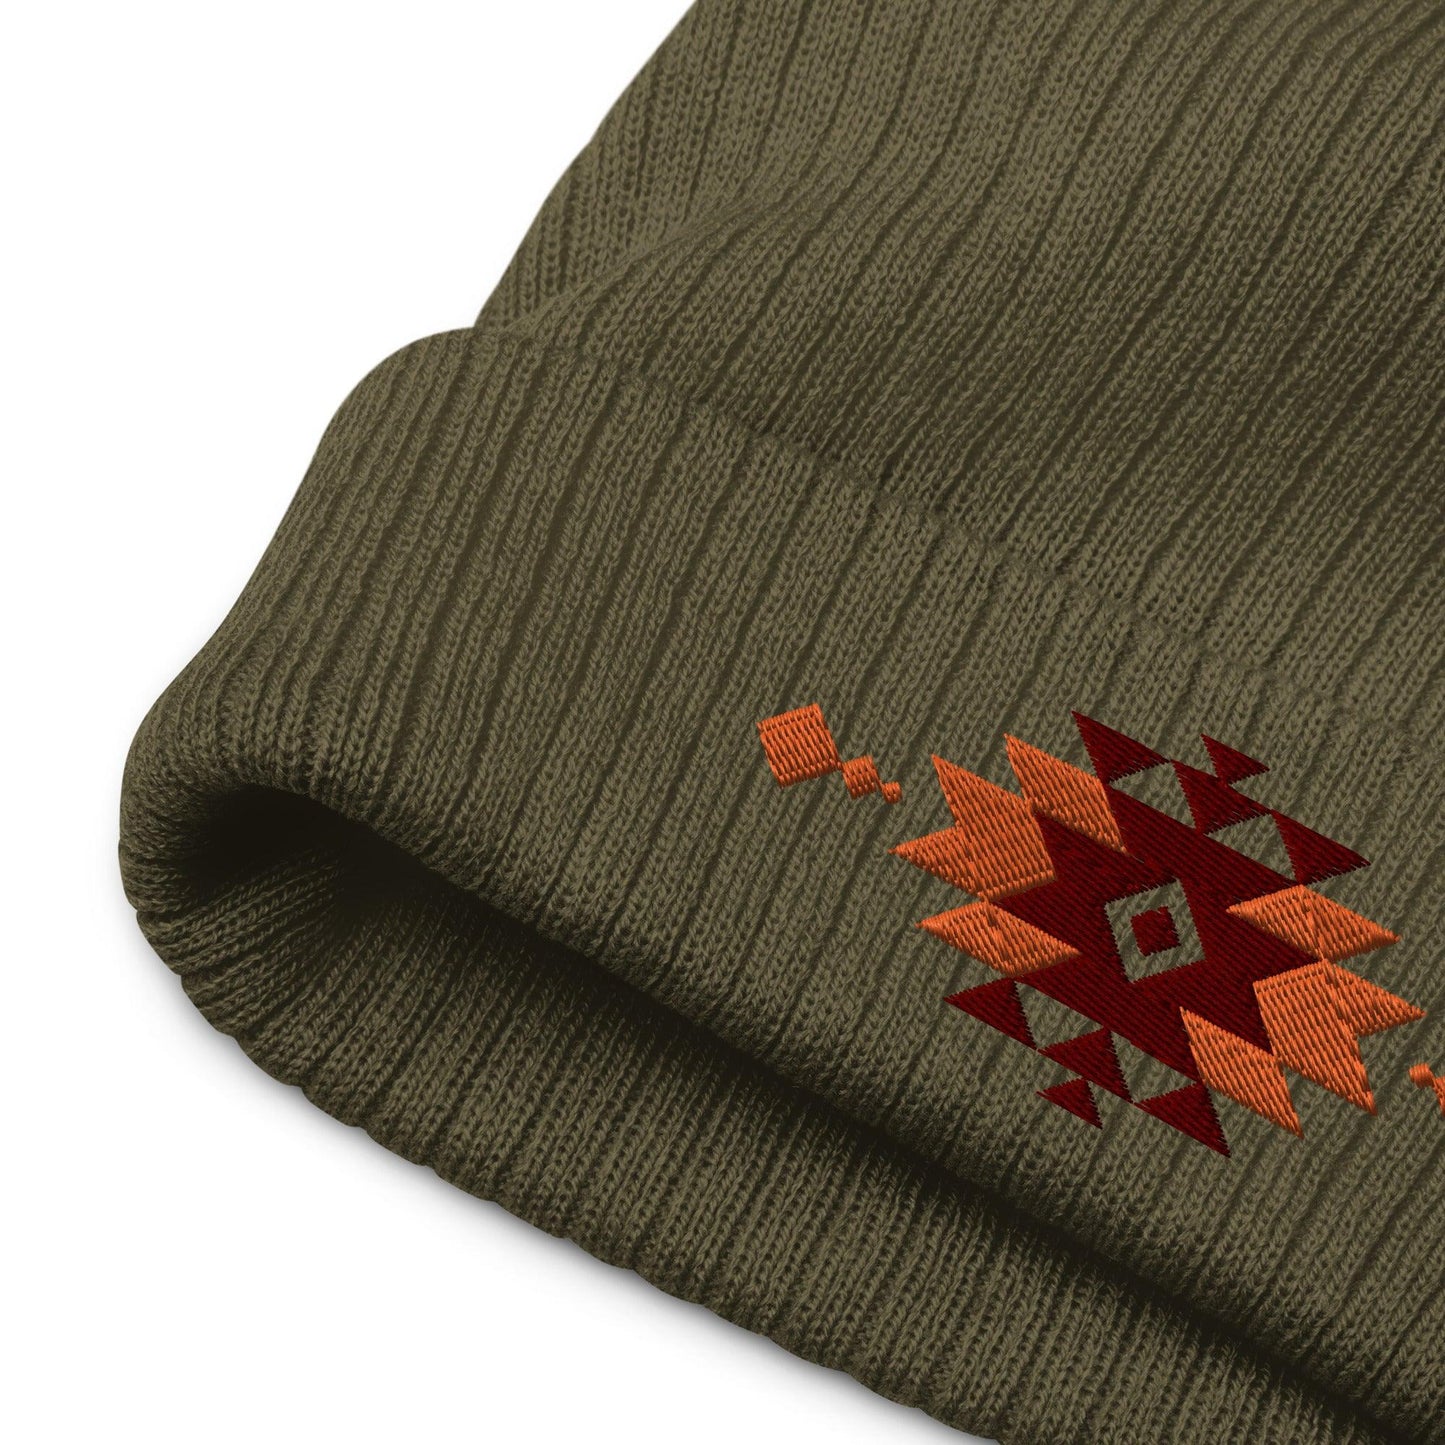 Southwestern Embroidered Beanie - The Global Wanderer